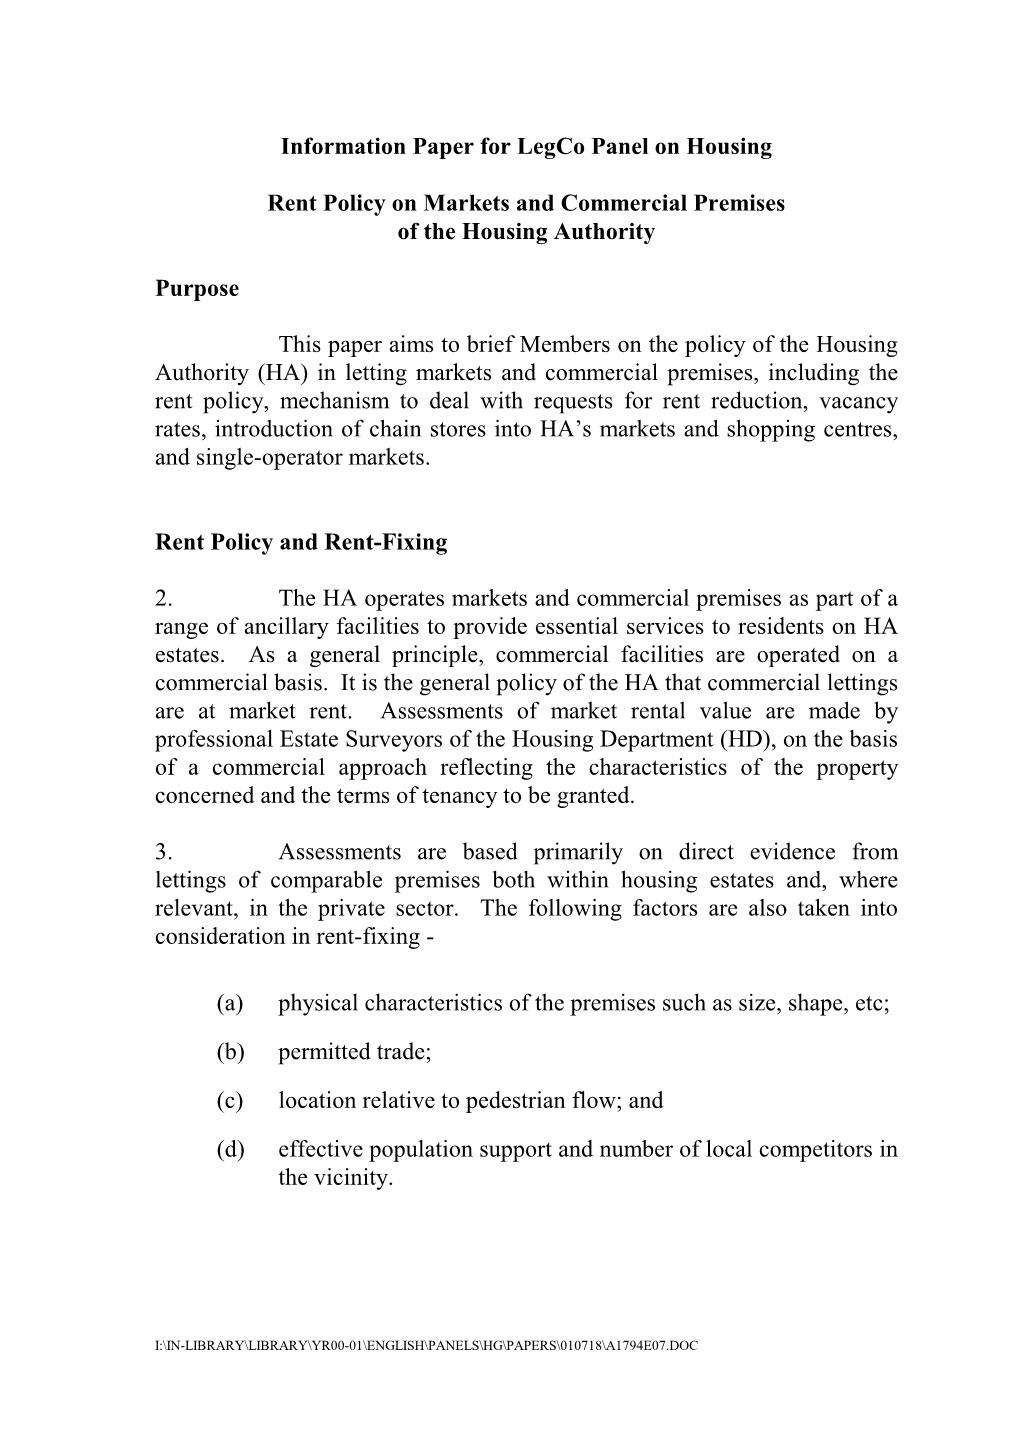 Information Paper for Legco Panel on Housing Rent Policy on Markets